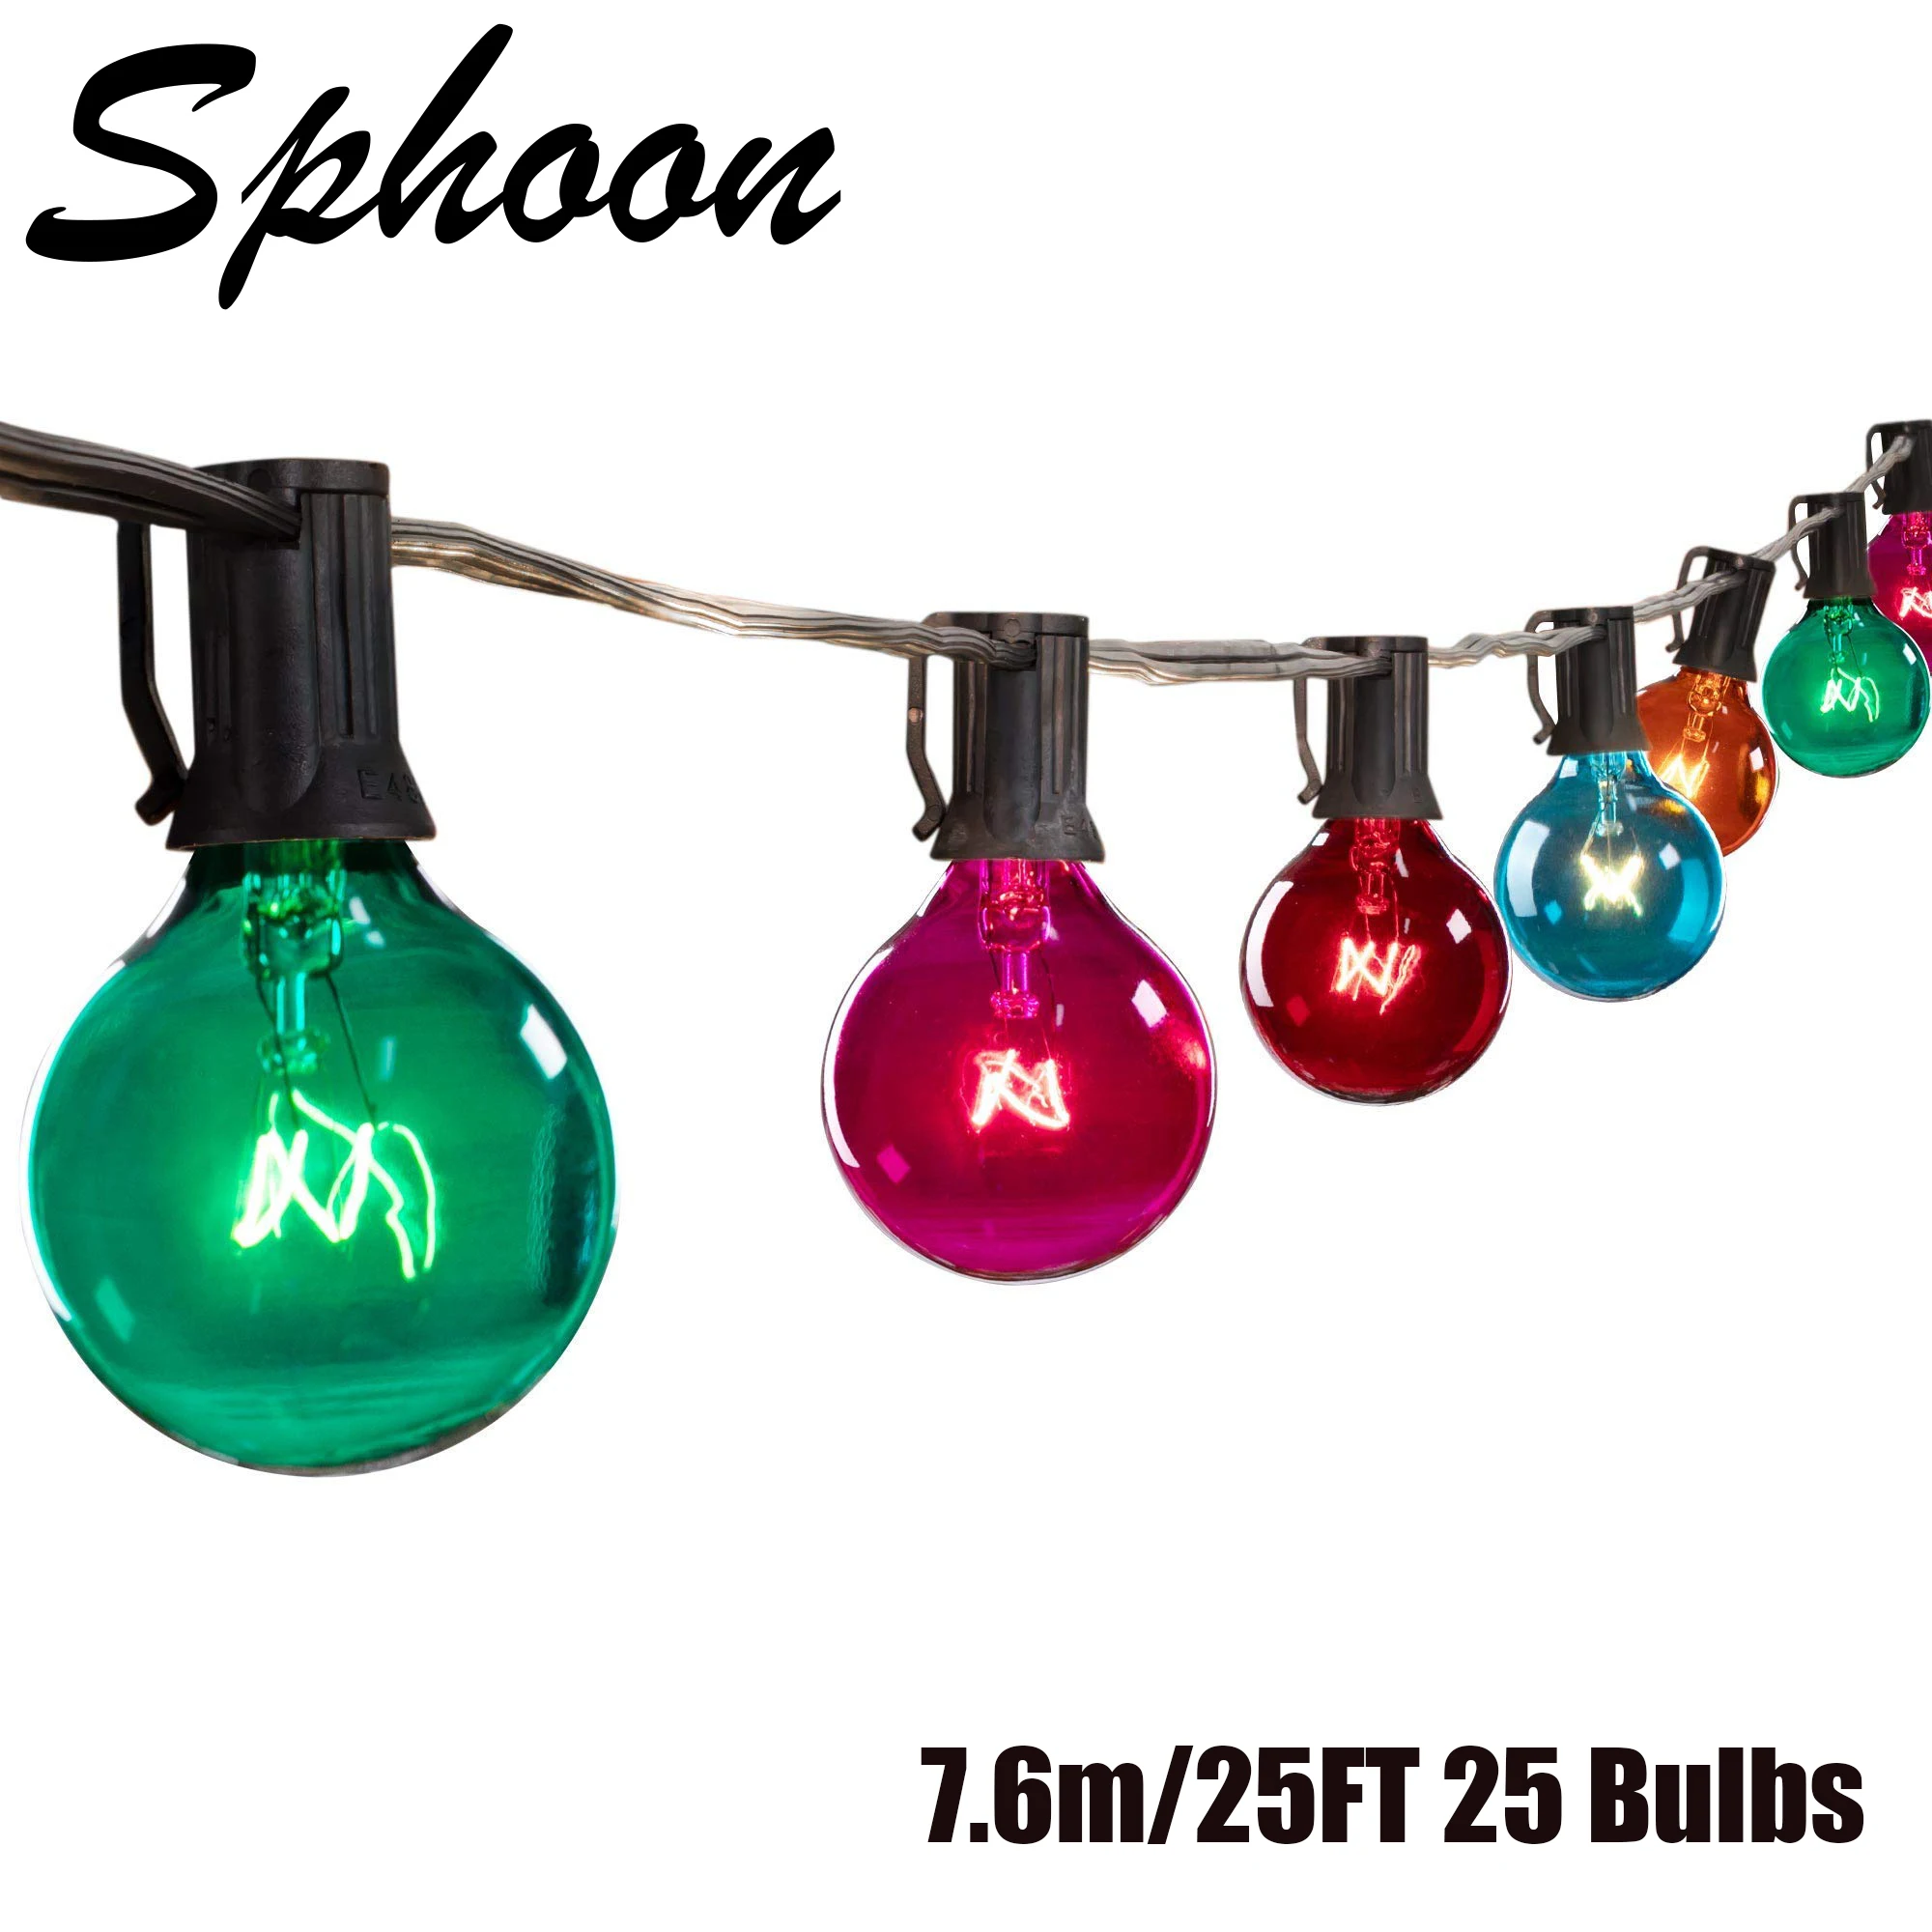 

25Ft G40 Globe Patio String Lights with 25 Multicolor Bulbs Indoor Outdoor Christmas String Lights for Backyard Garden Party